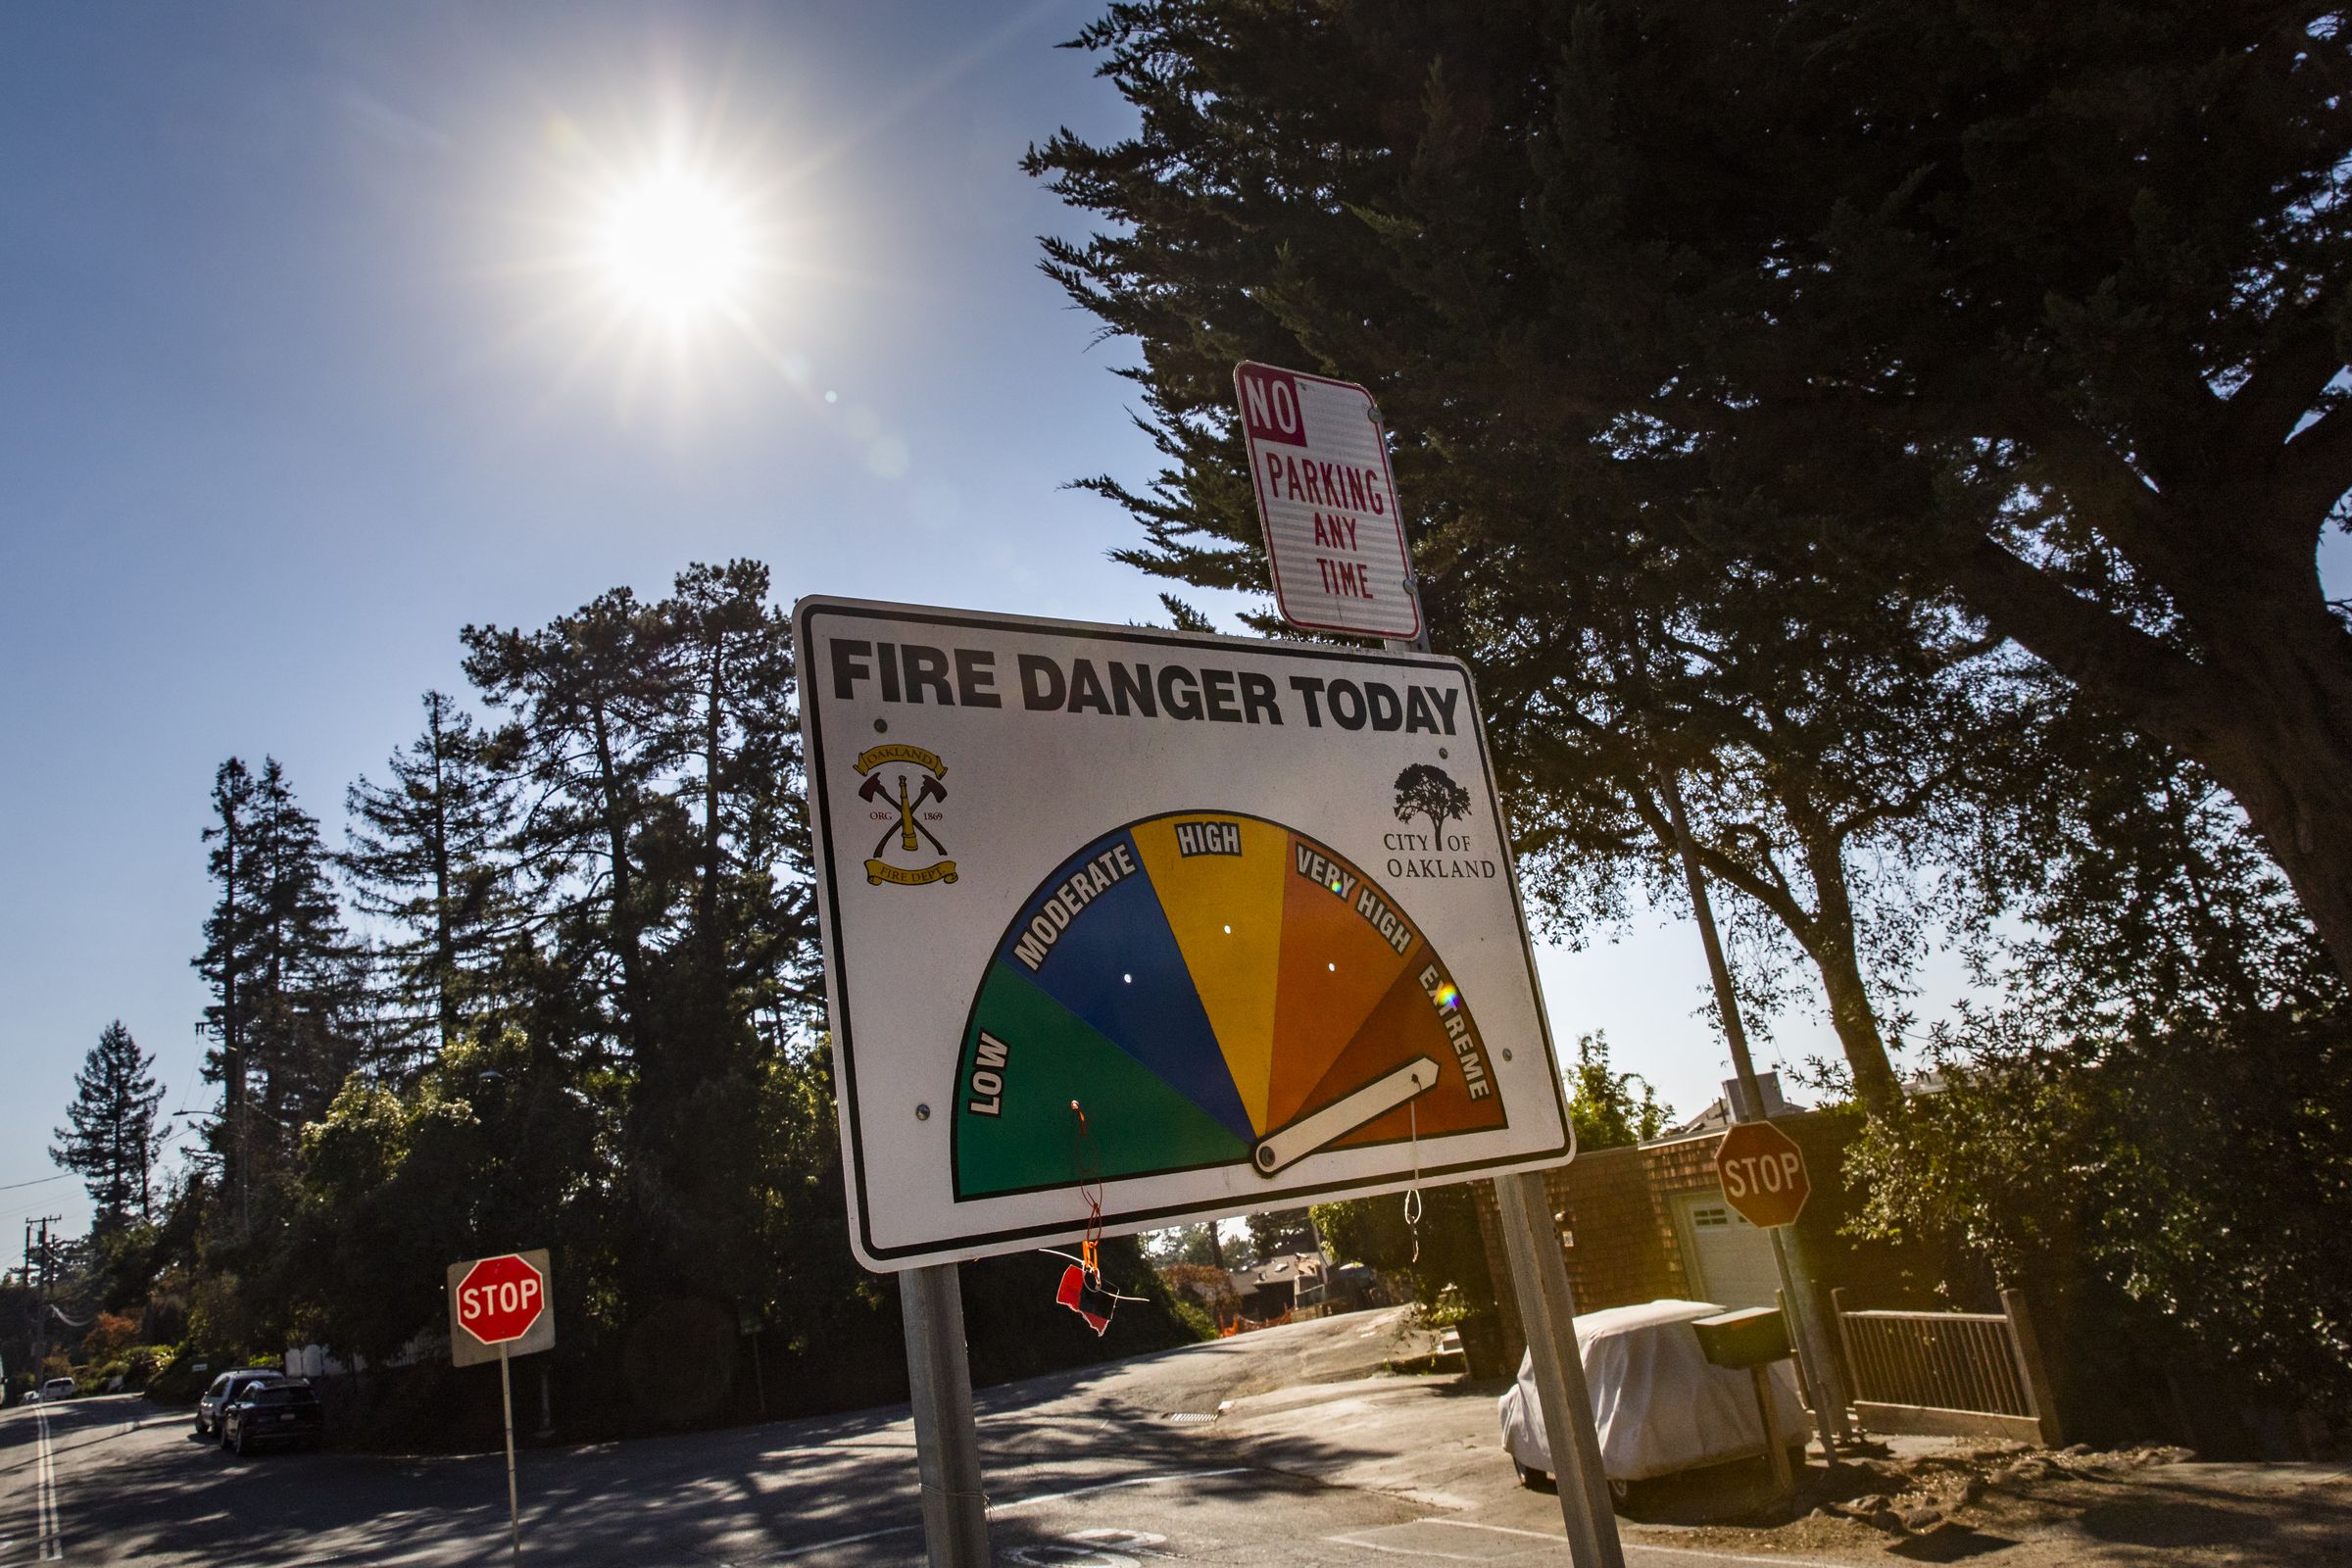 A street sign in a residential neighborhood says “Fire Danger Today” with an arrow point to “extreme”